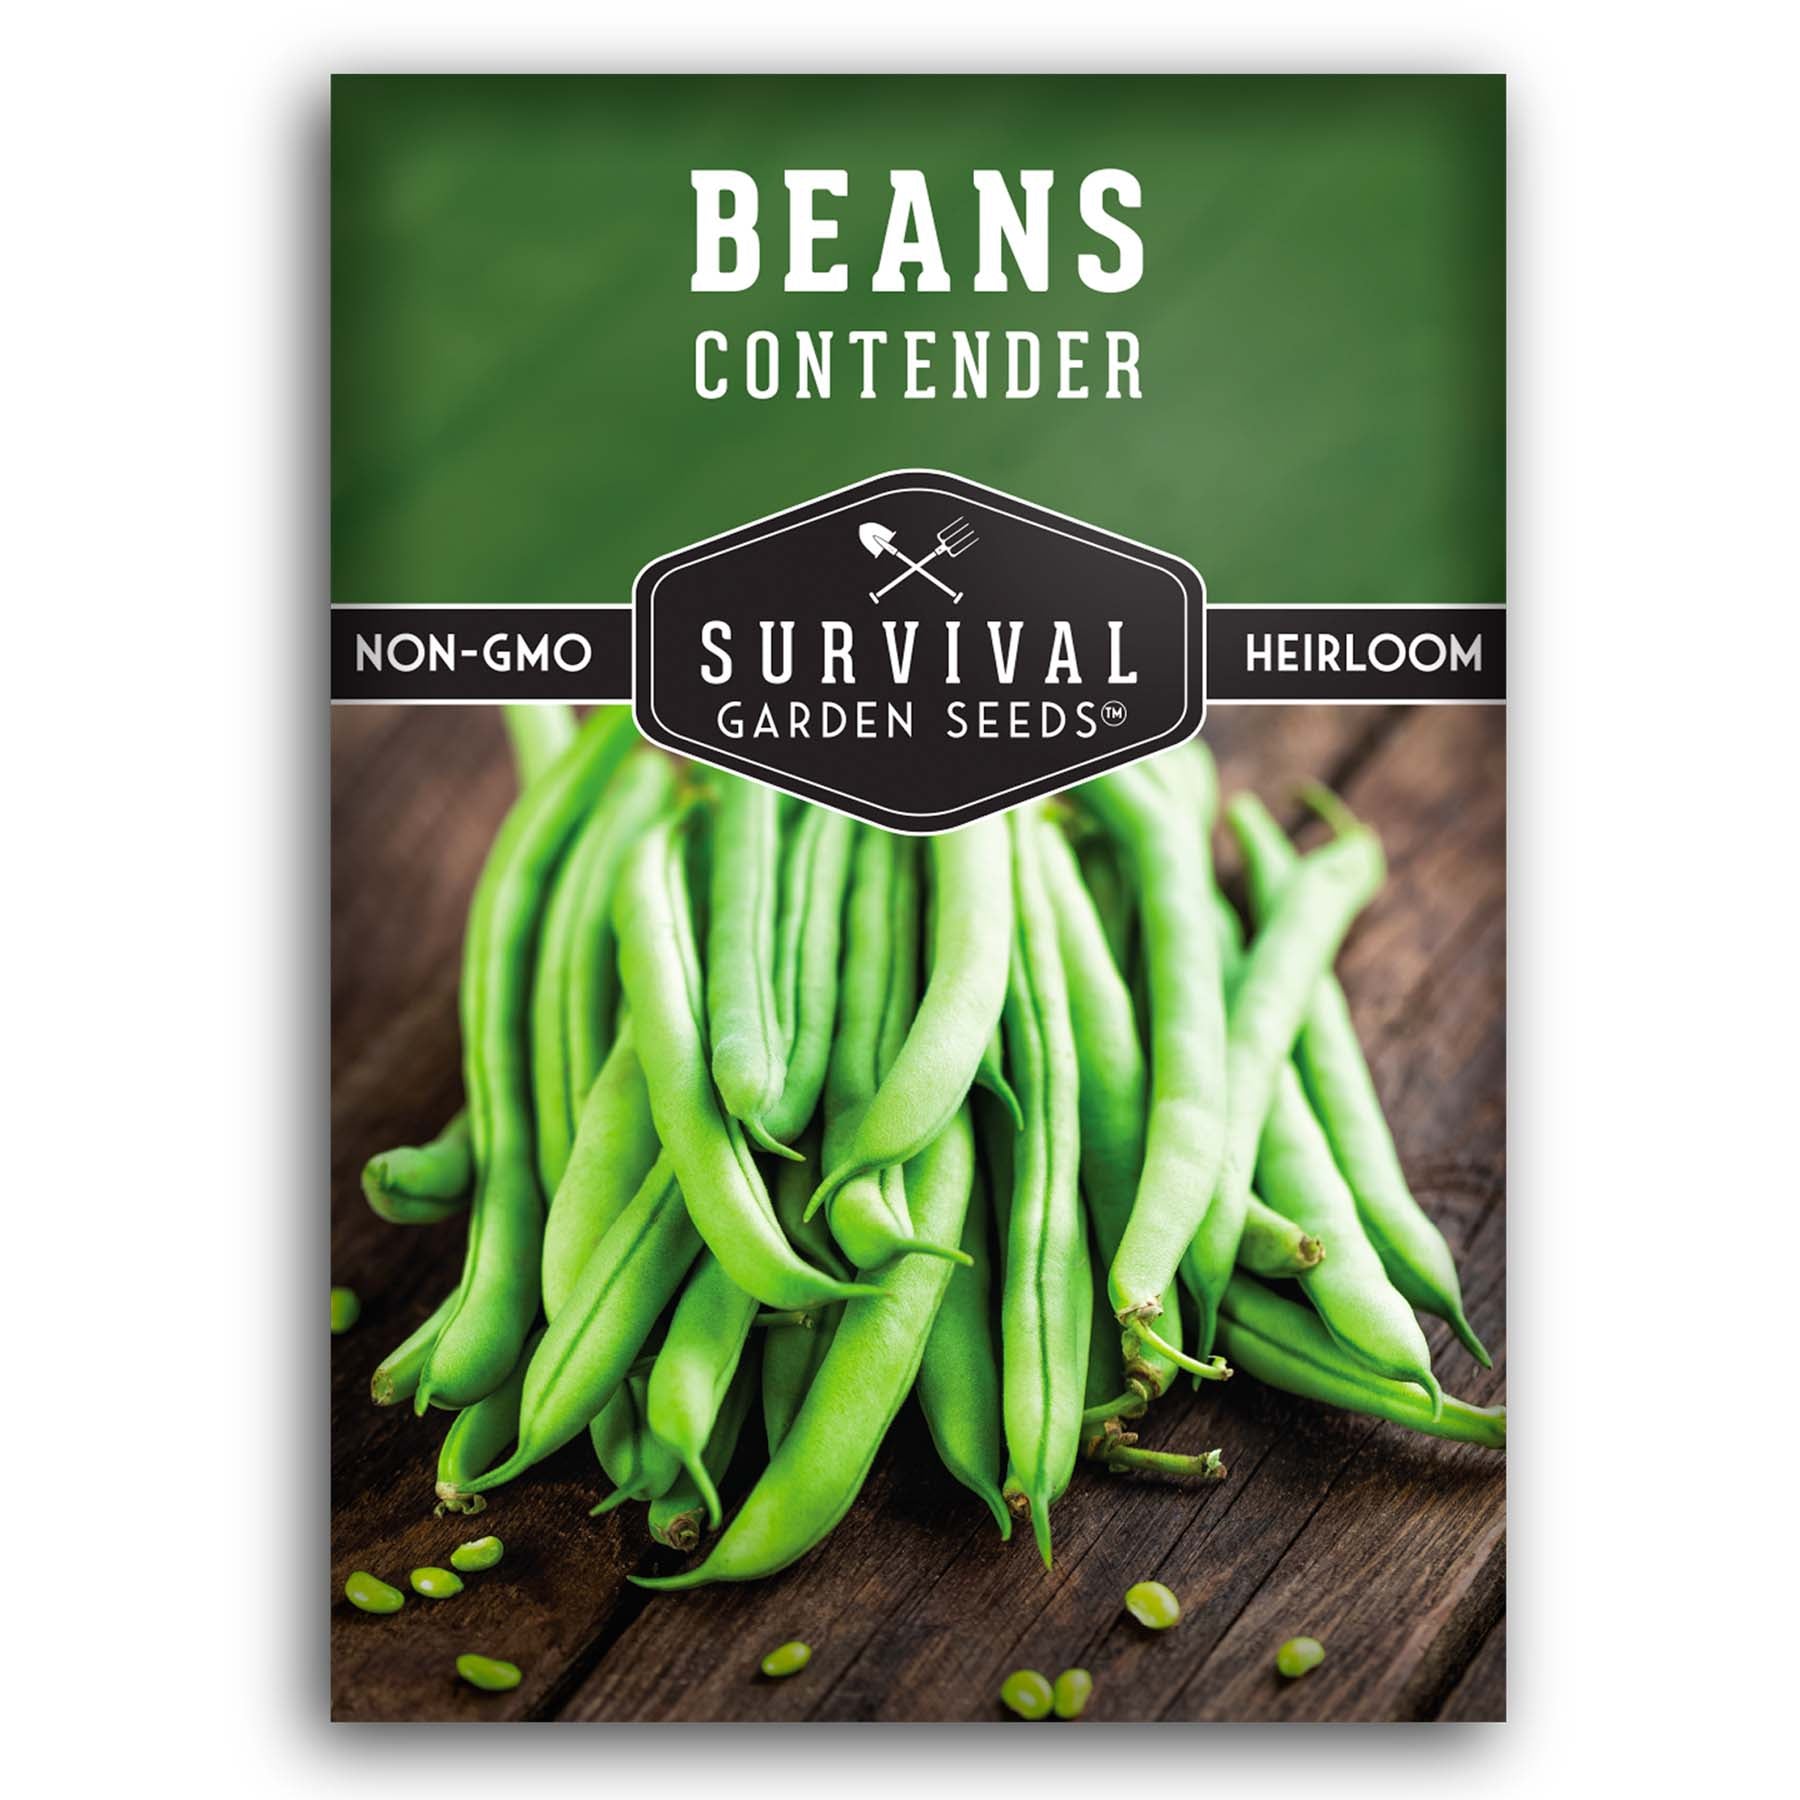 Contender Bean Seeds for planting